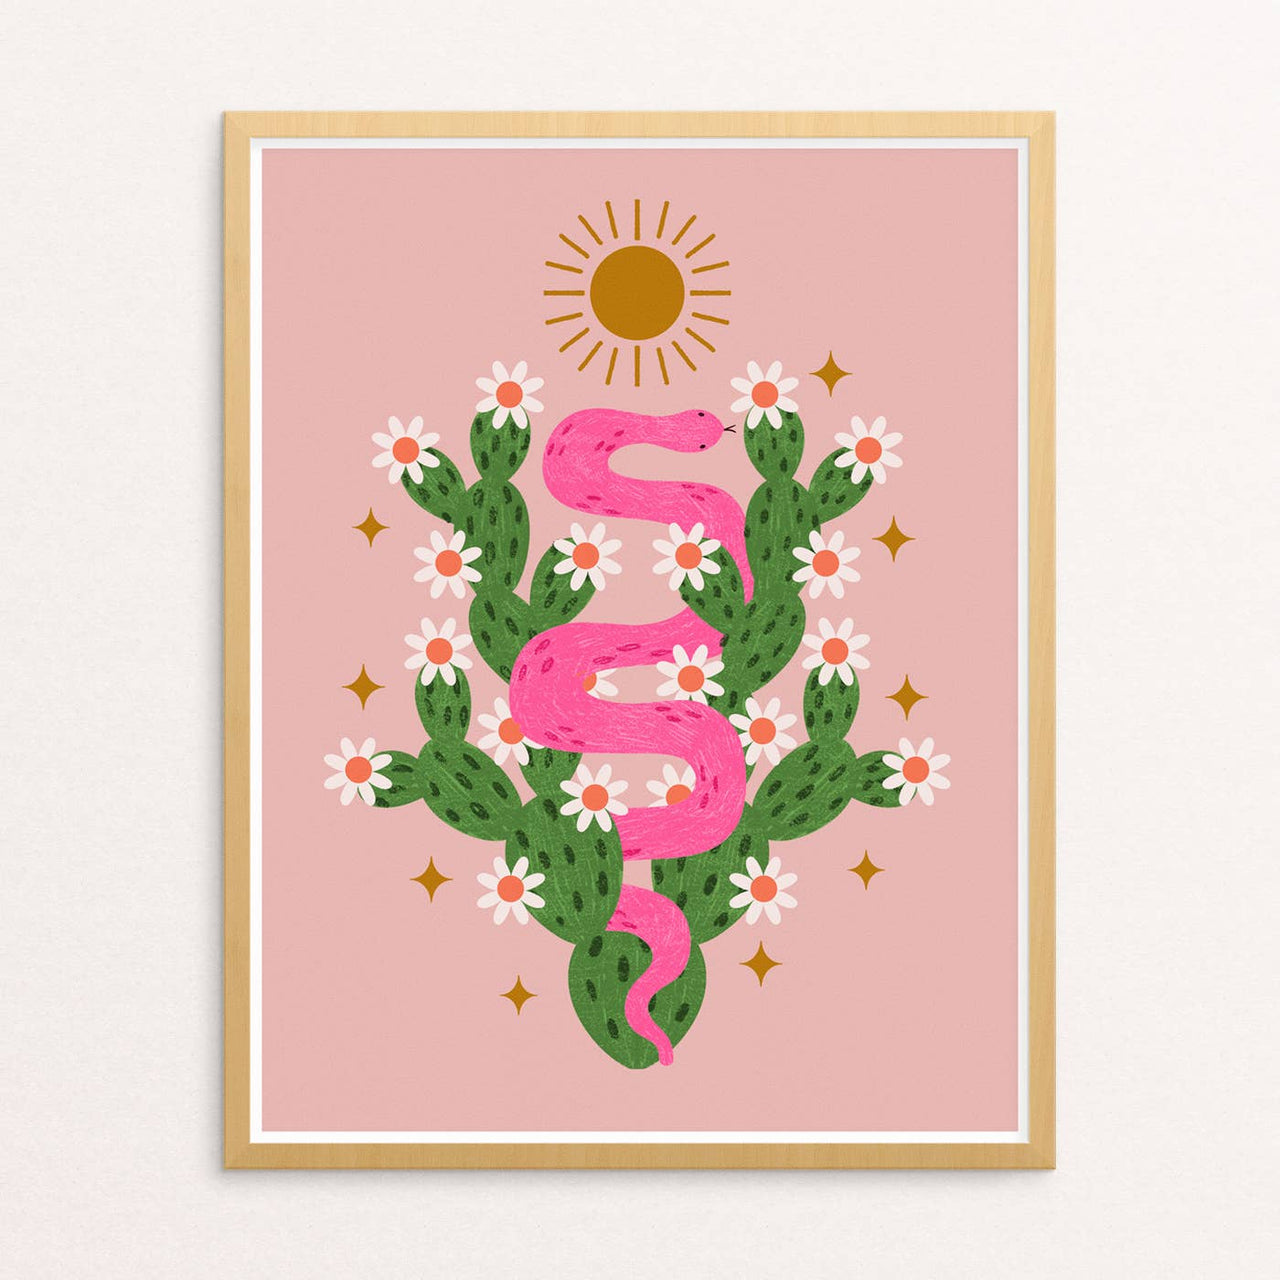 Squidly - Snake & Cactus Print (8" x 10")